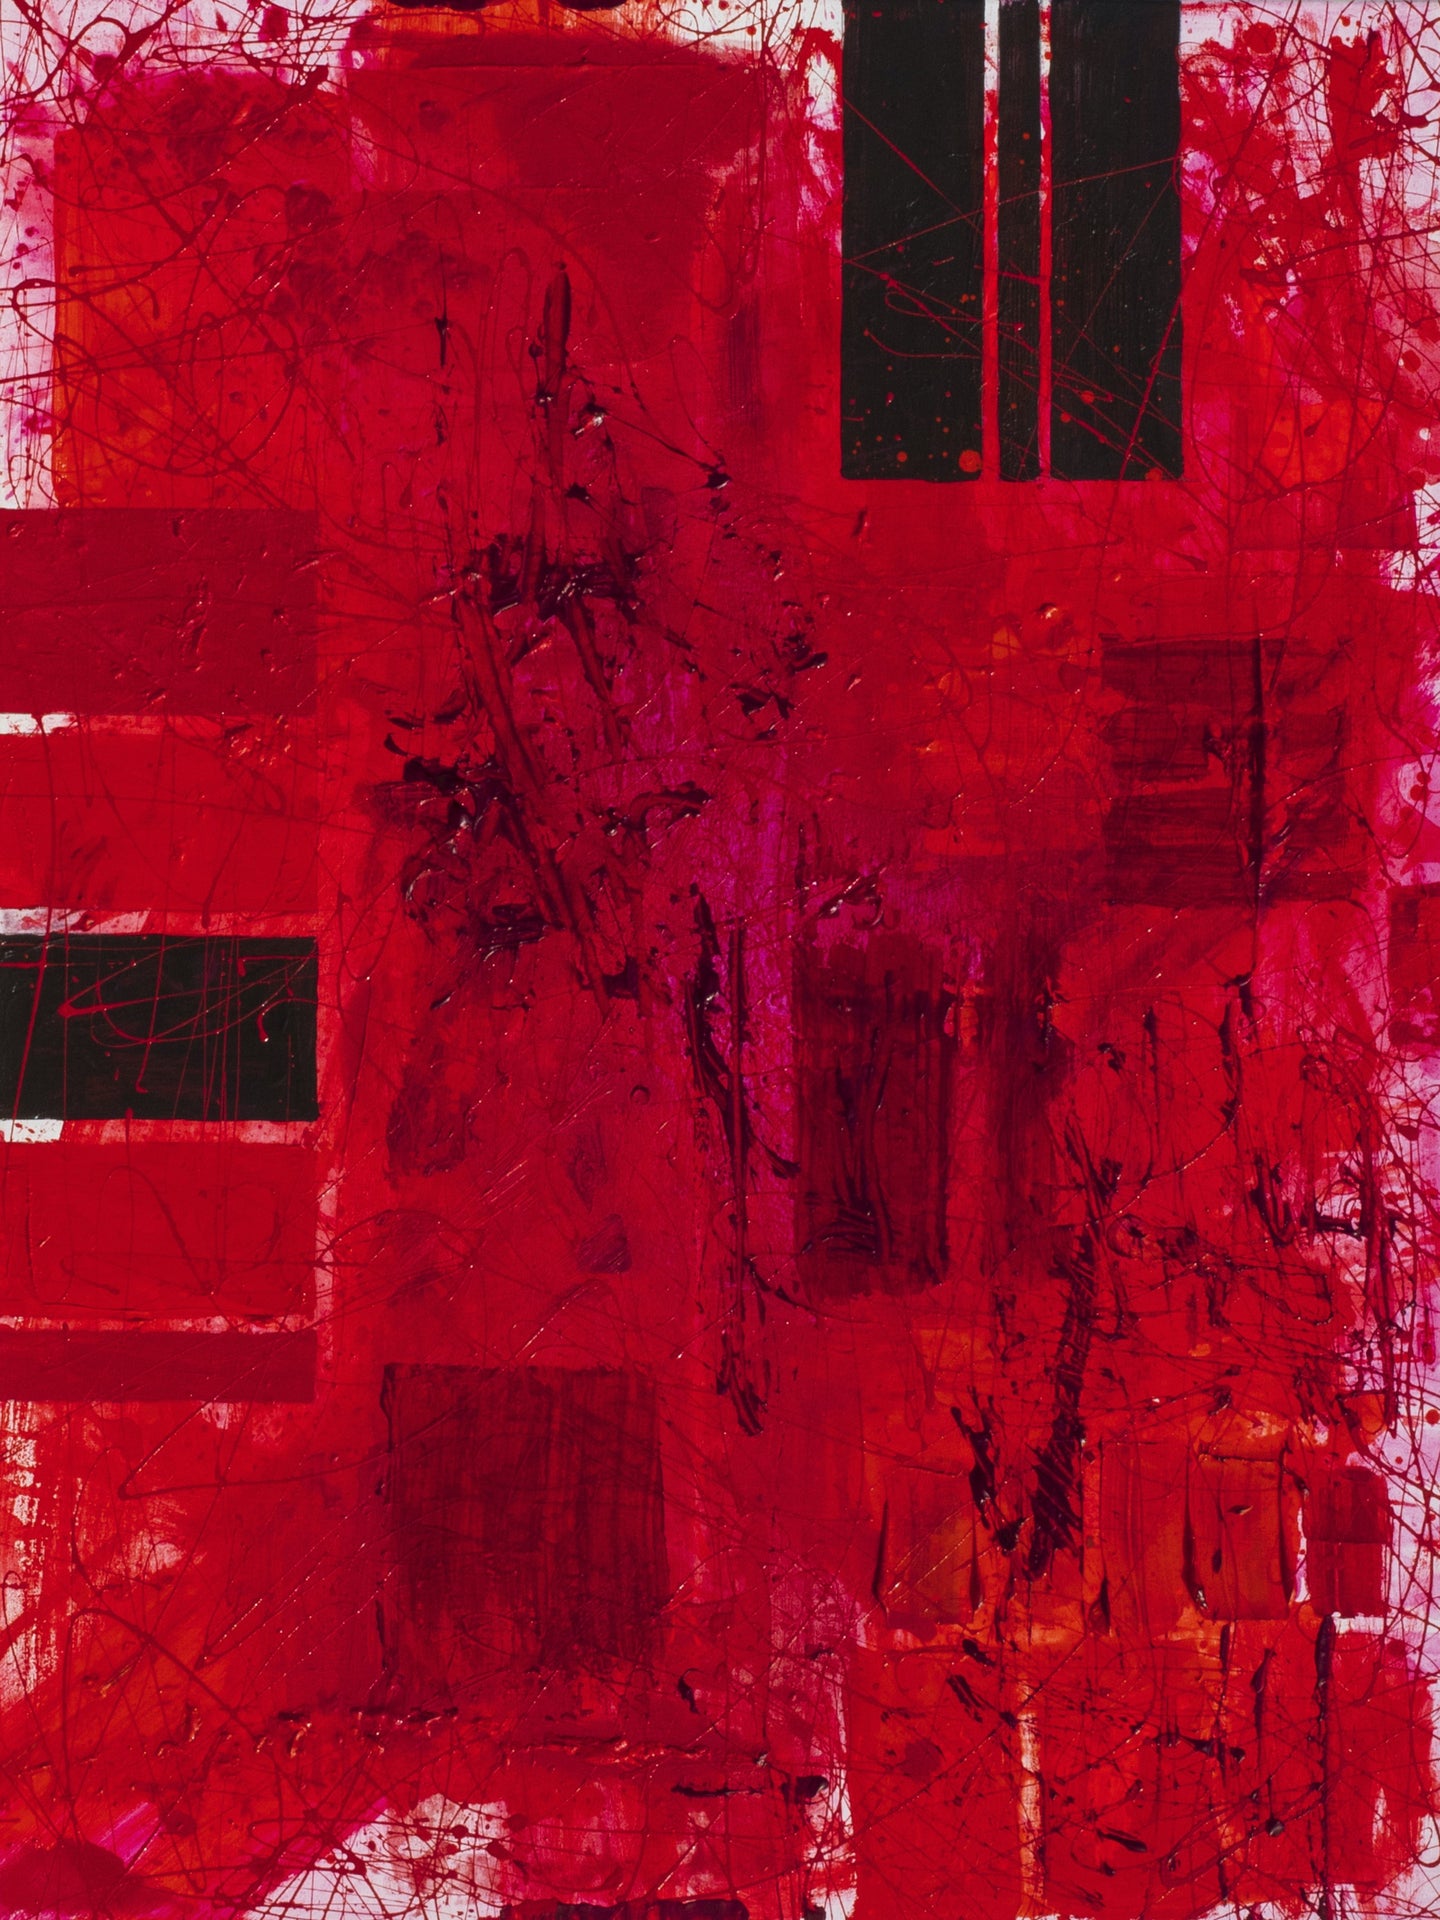 J. Steven Manolis, REDWORLD-diptych, 2019.02, acrylic and latex enamel on canvas, 48 x 36 inches, Red and Black Abstract, Abstract expressionism art for sale at Manolis Projects Art Gallery, Miami, Fl